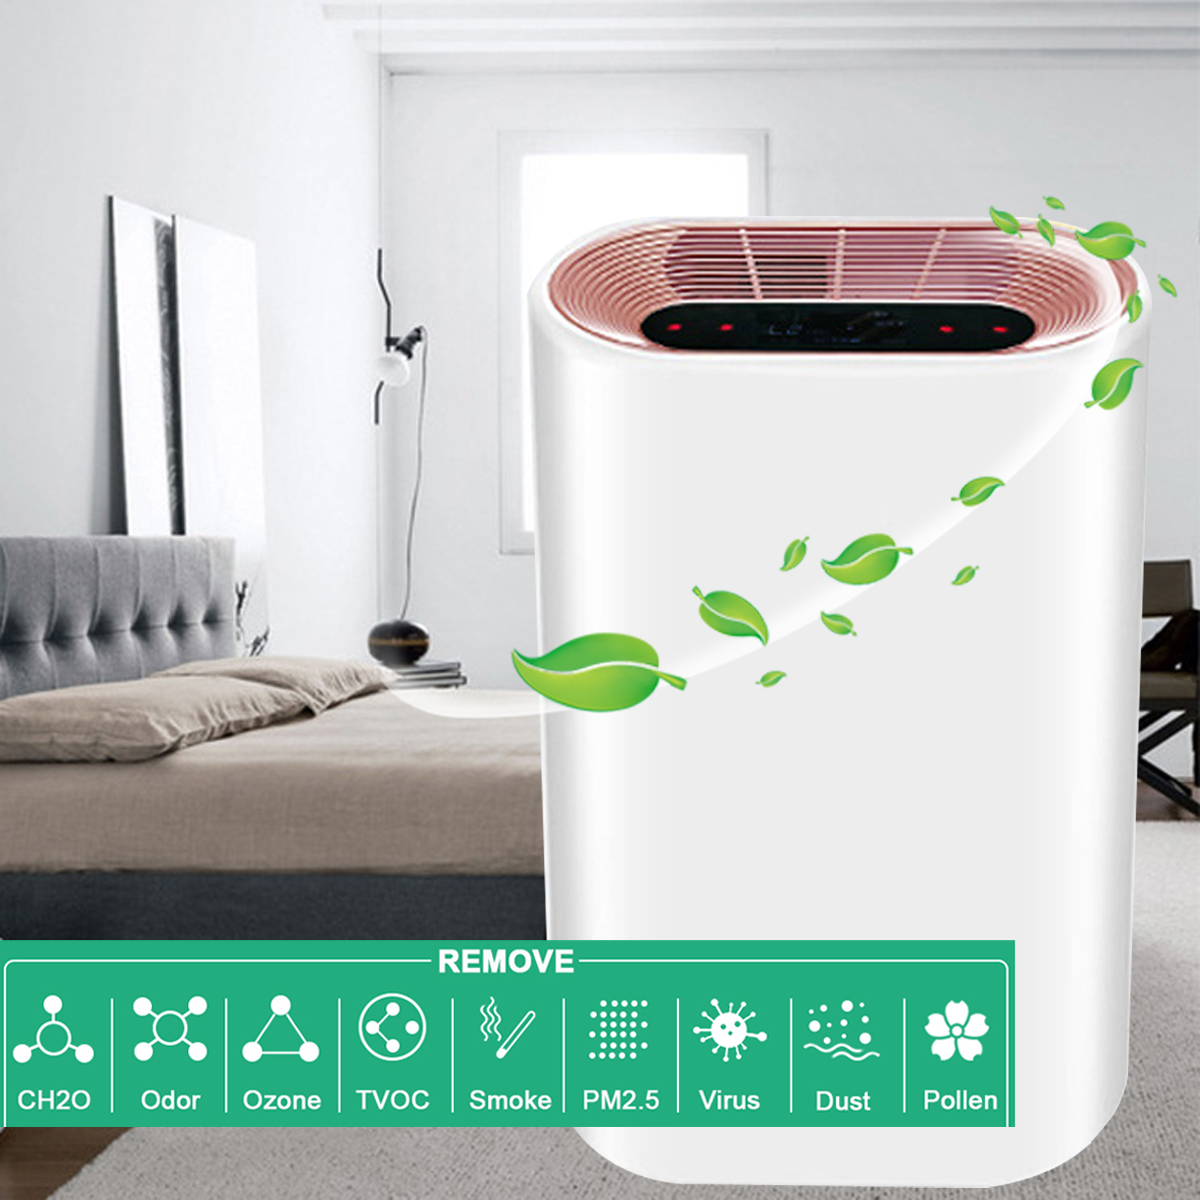 Automatic-Home-Air-Purifier-Timing-Adjustable-3-Speed-Negative-ion-HEPA-Filter-1647481-3